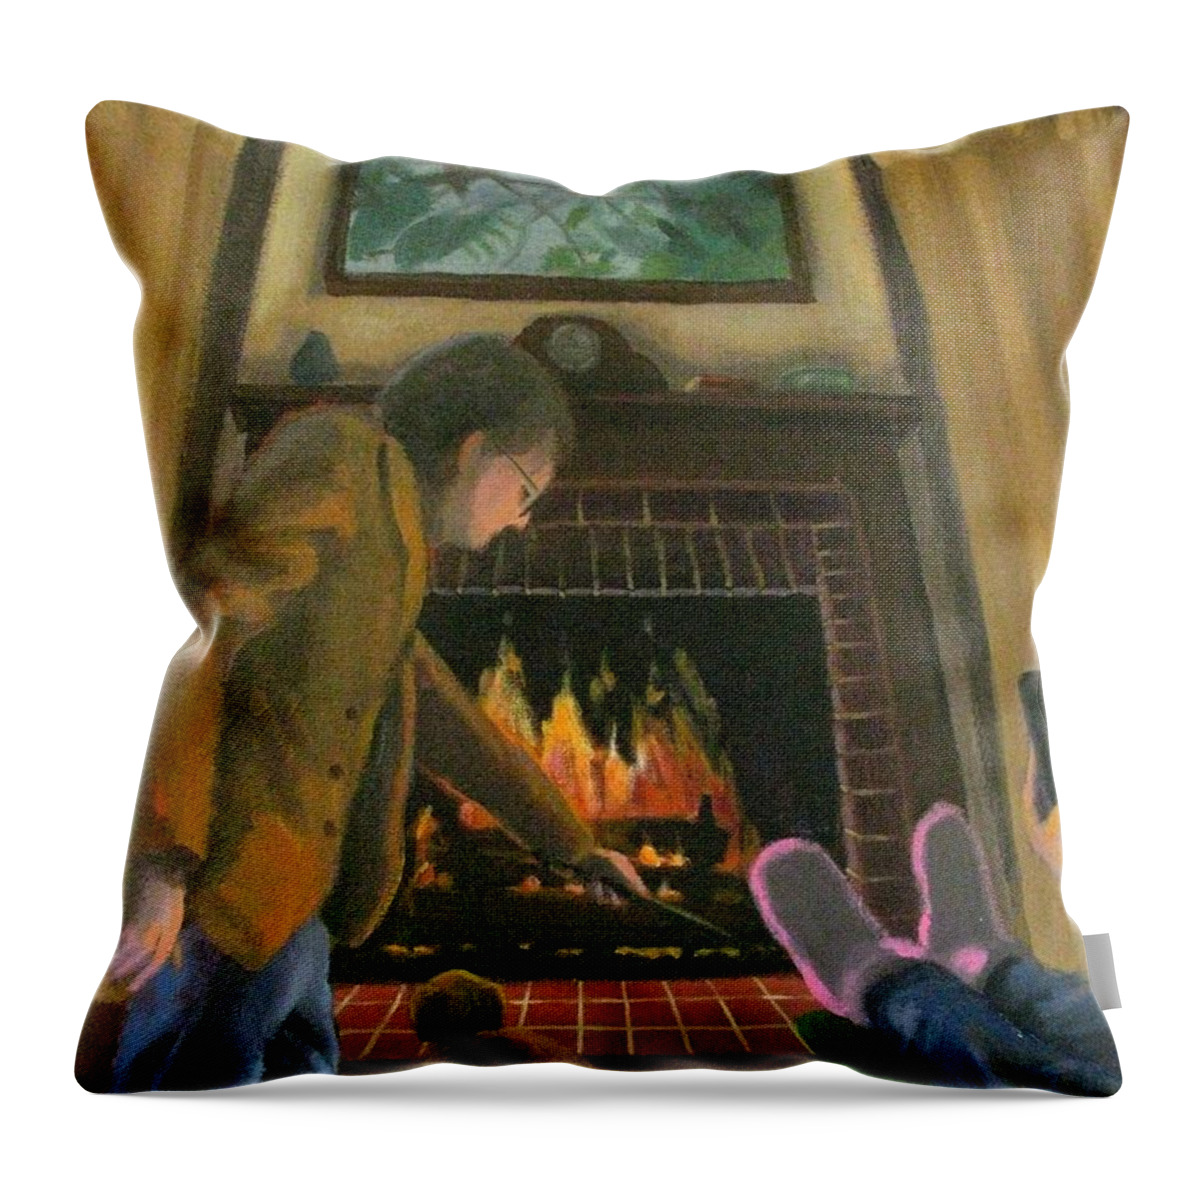 Fireplace Throw Pillow featuring the painting A Warm Fire by Don Morgan